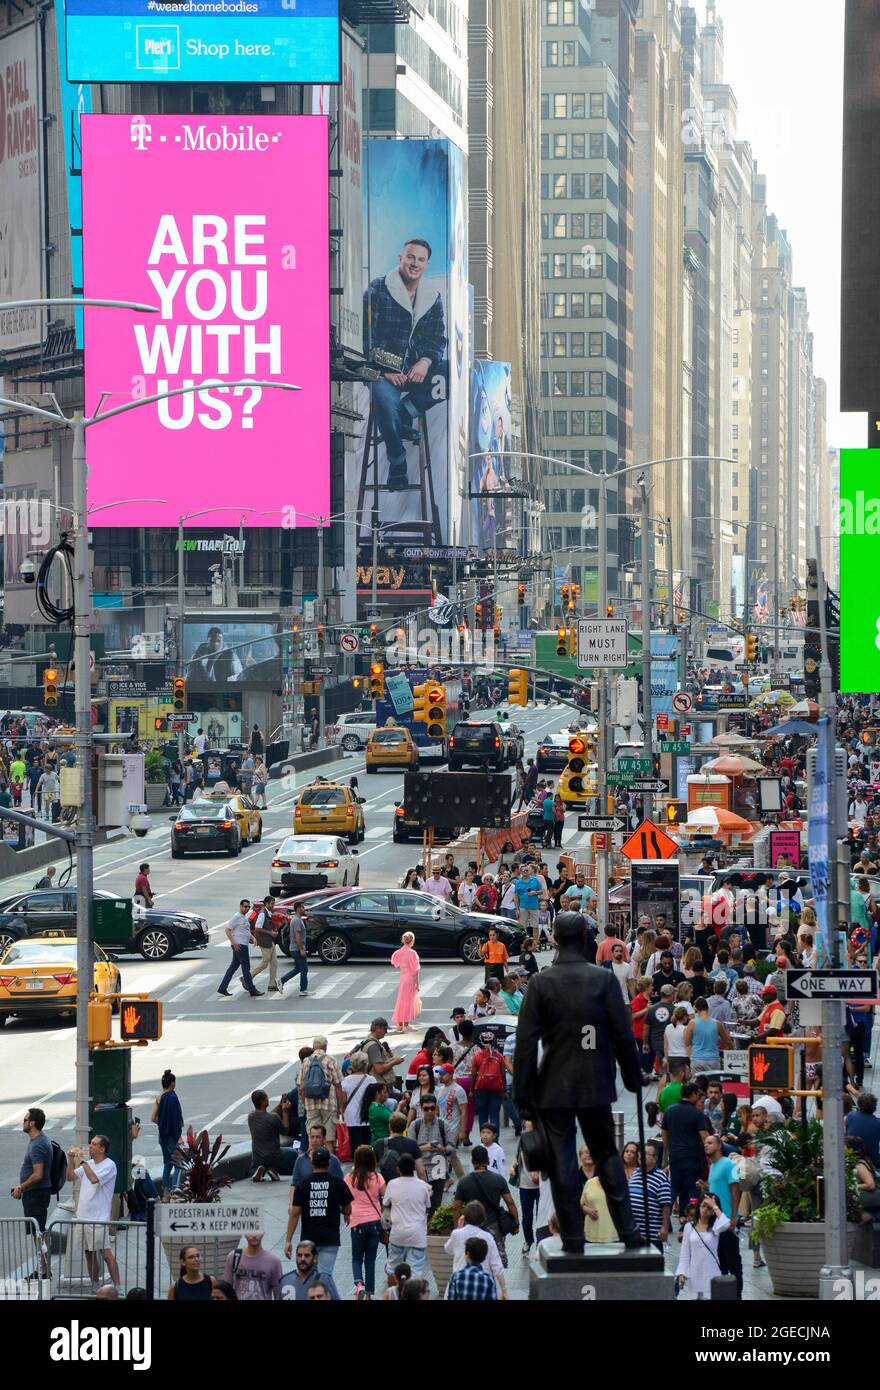 USA, New York City, Manhattan, traffic nd crowds at Time square at crossing Broadway und Seventh Avenue, german mobile service company T-Mobile advertising Stock Photo